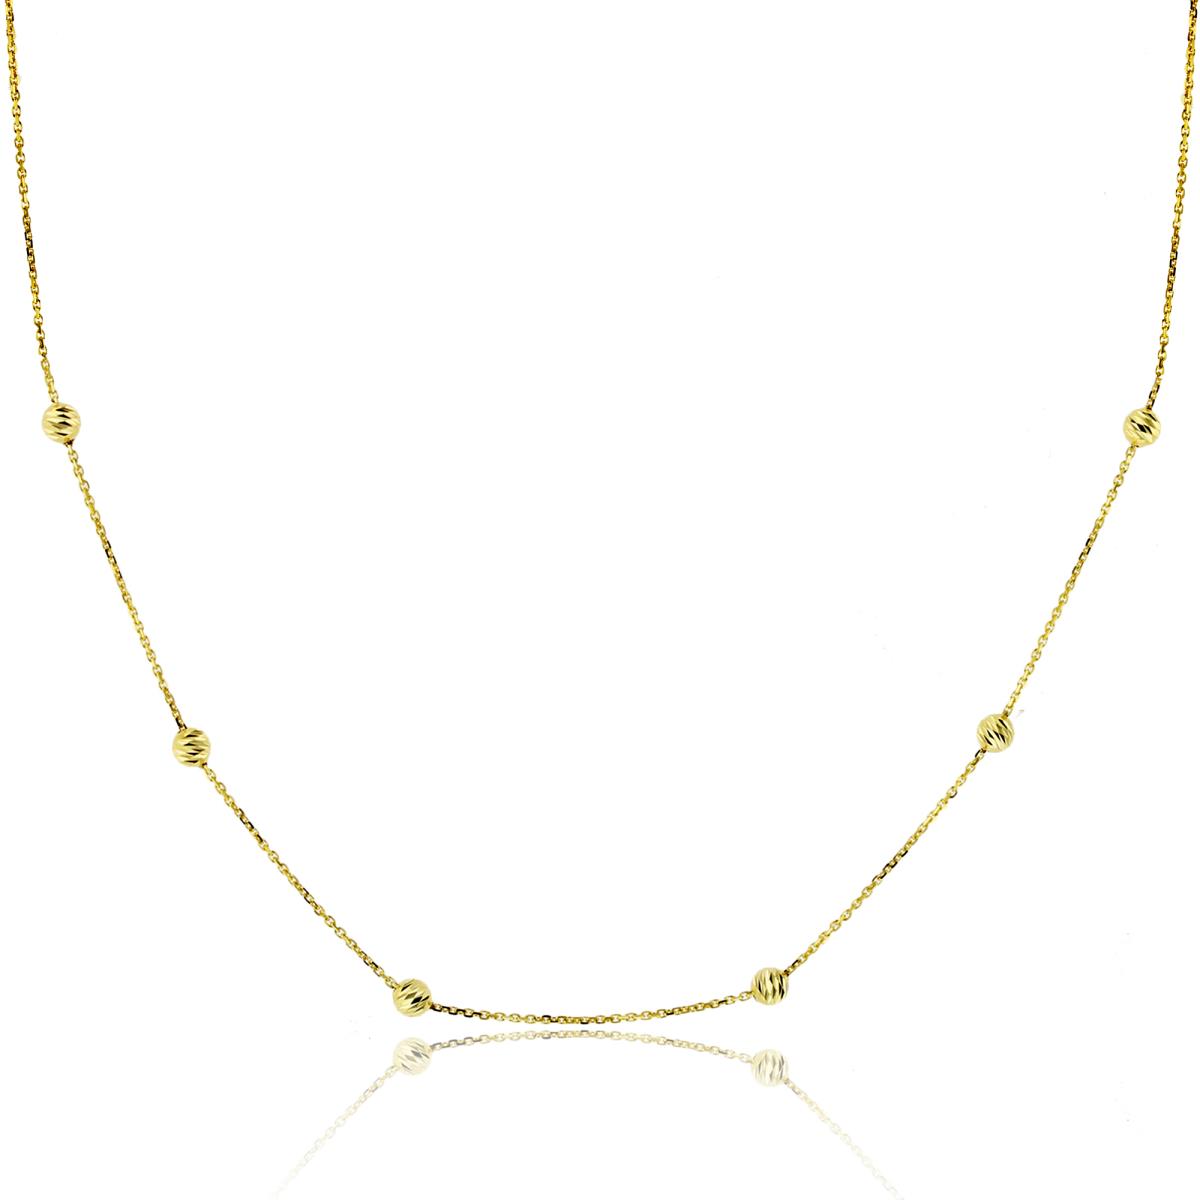 10K Yellow Gold 4mm DC Beads 18" Station Necklace